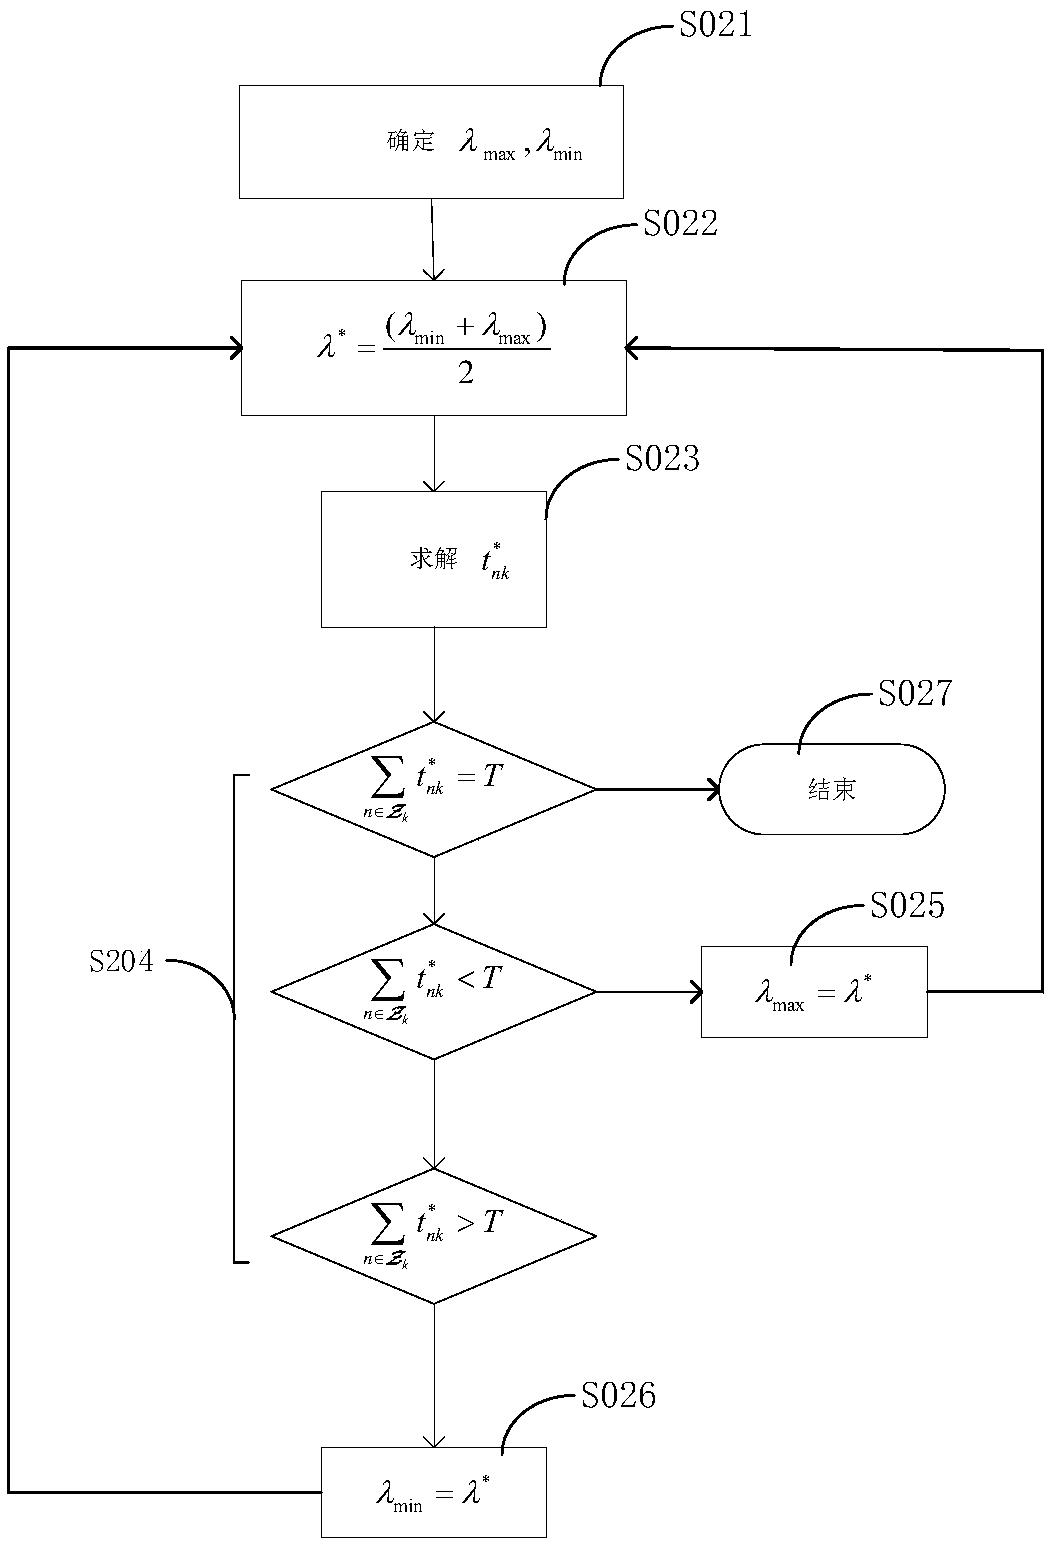 Method for associating user to network under small cell base station ultra-dense deployment